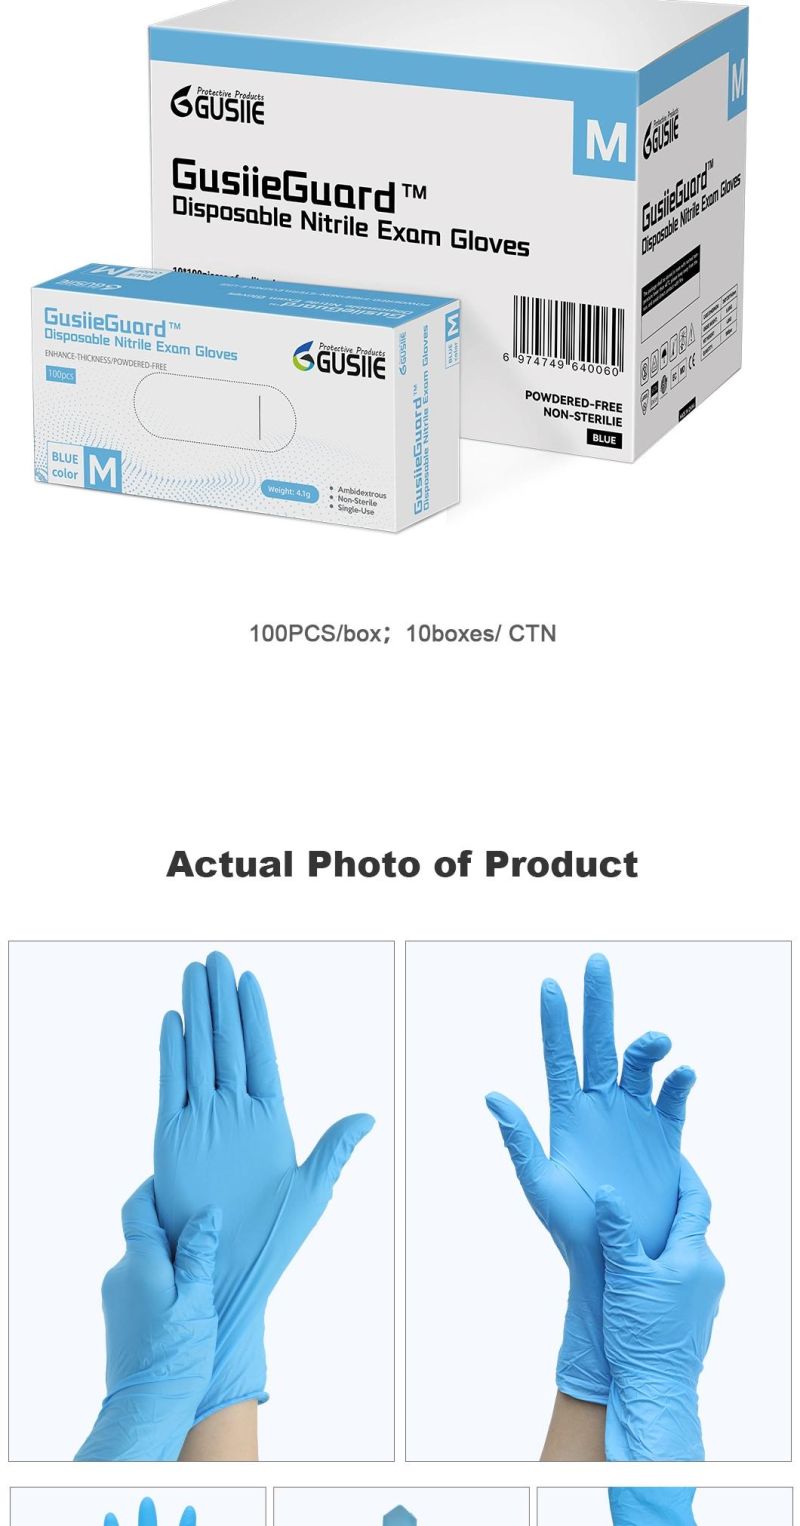 Gusiie Disposable Factory Medical Examination Powder Free Nitrile Large Gloves